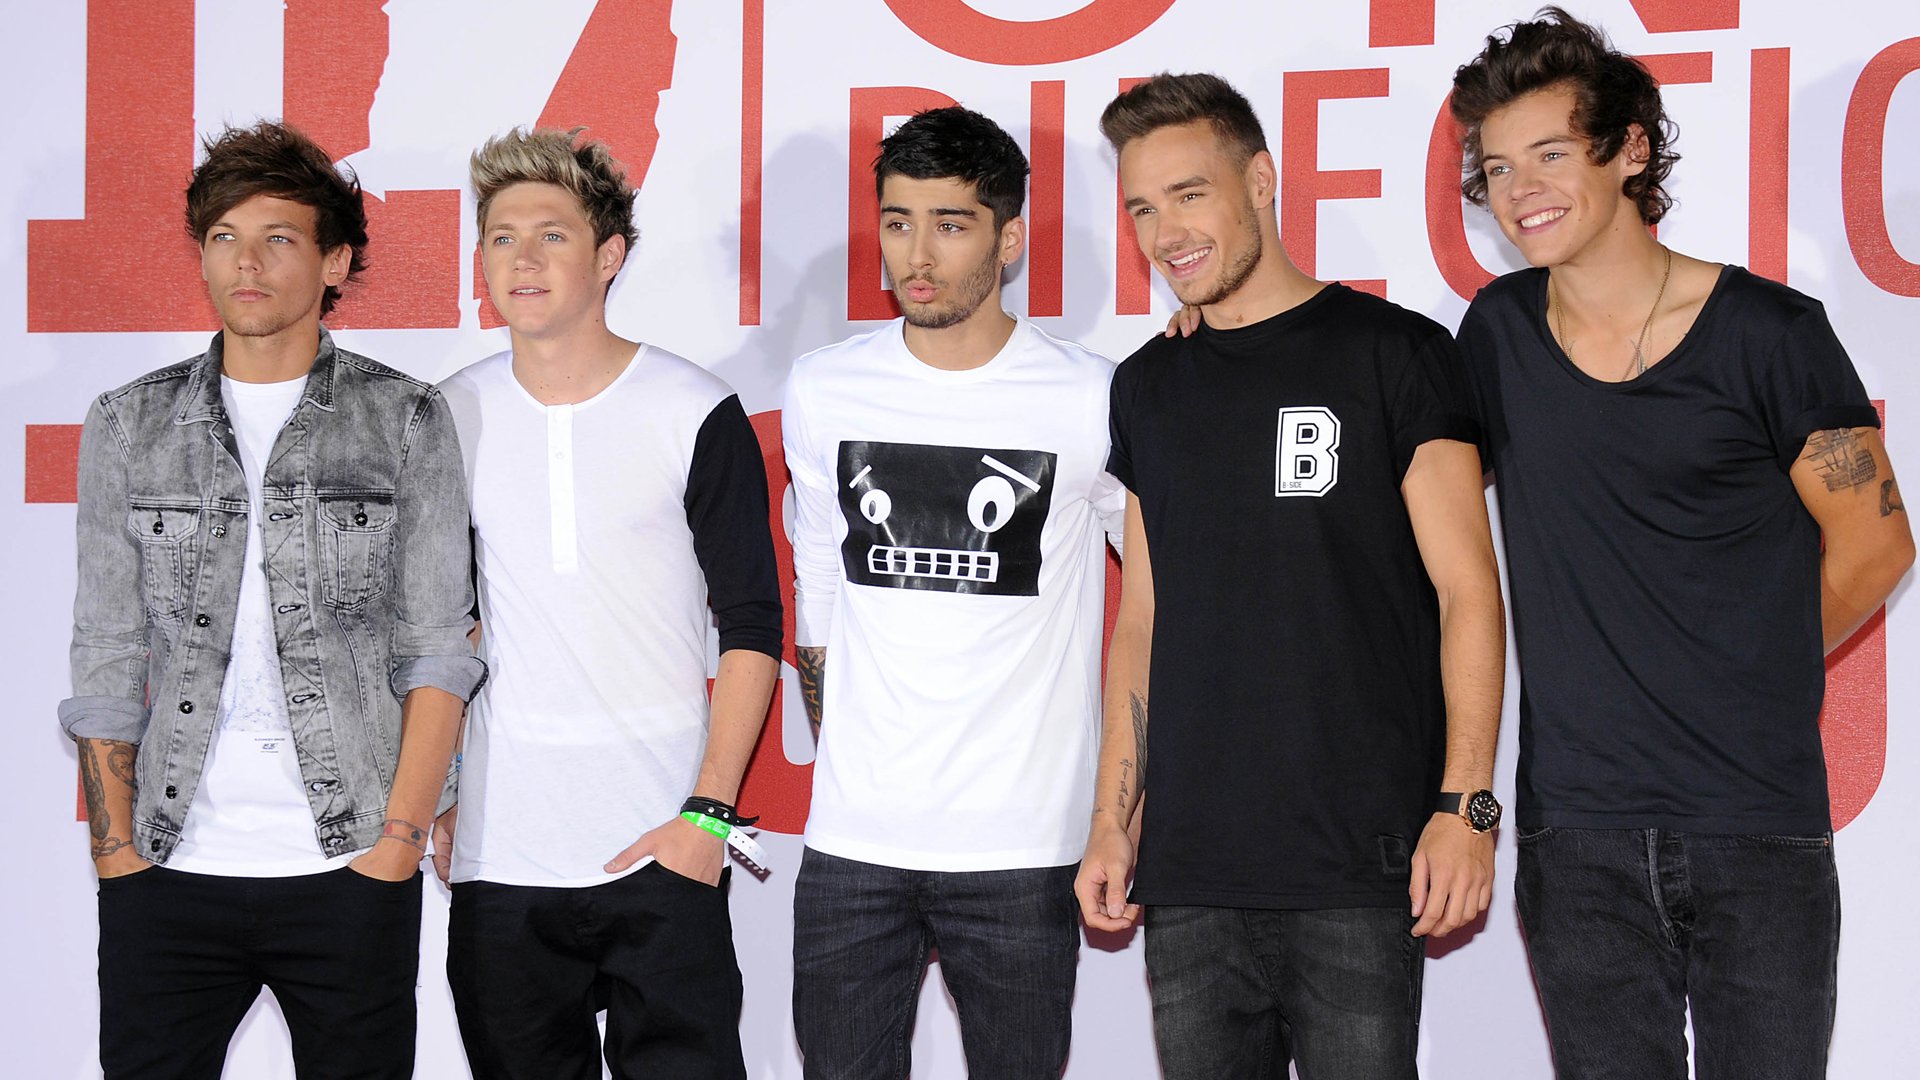 Louis Tamlinson, Zayn Malik, Niall Horan, Liam Payne and Harry Styles of One Direction attend a photocall to launch their new film 'one Direction: This Is Us 3D' on August 19, 2013 in London, England. 